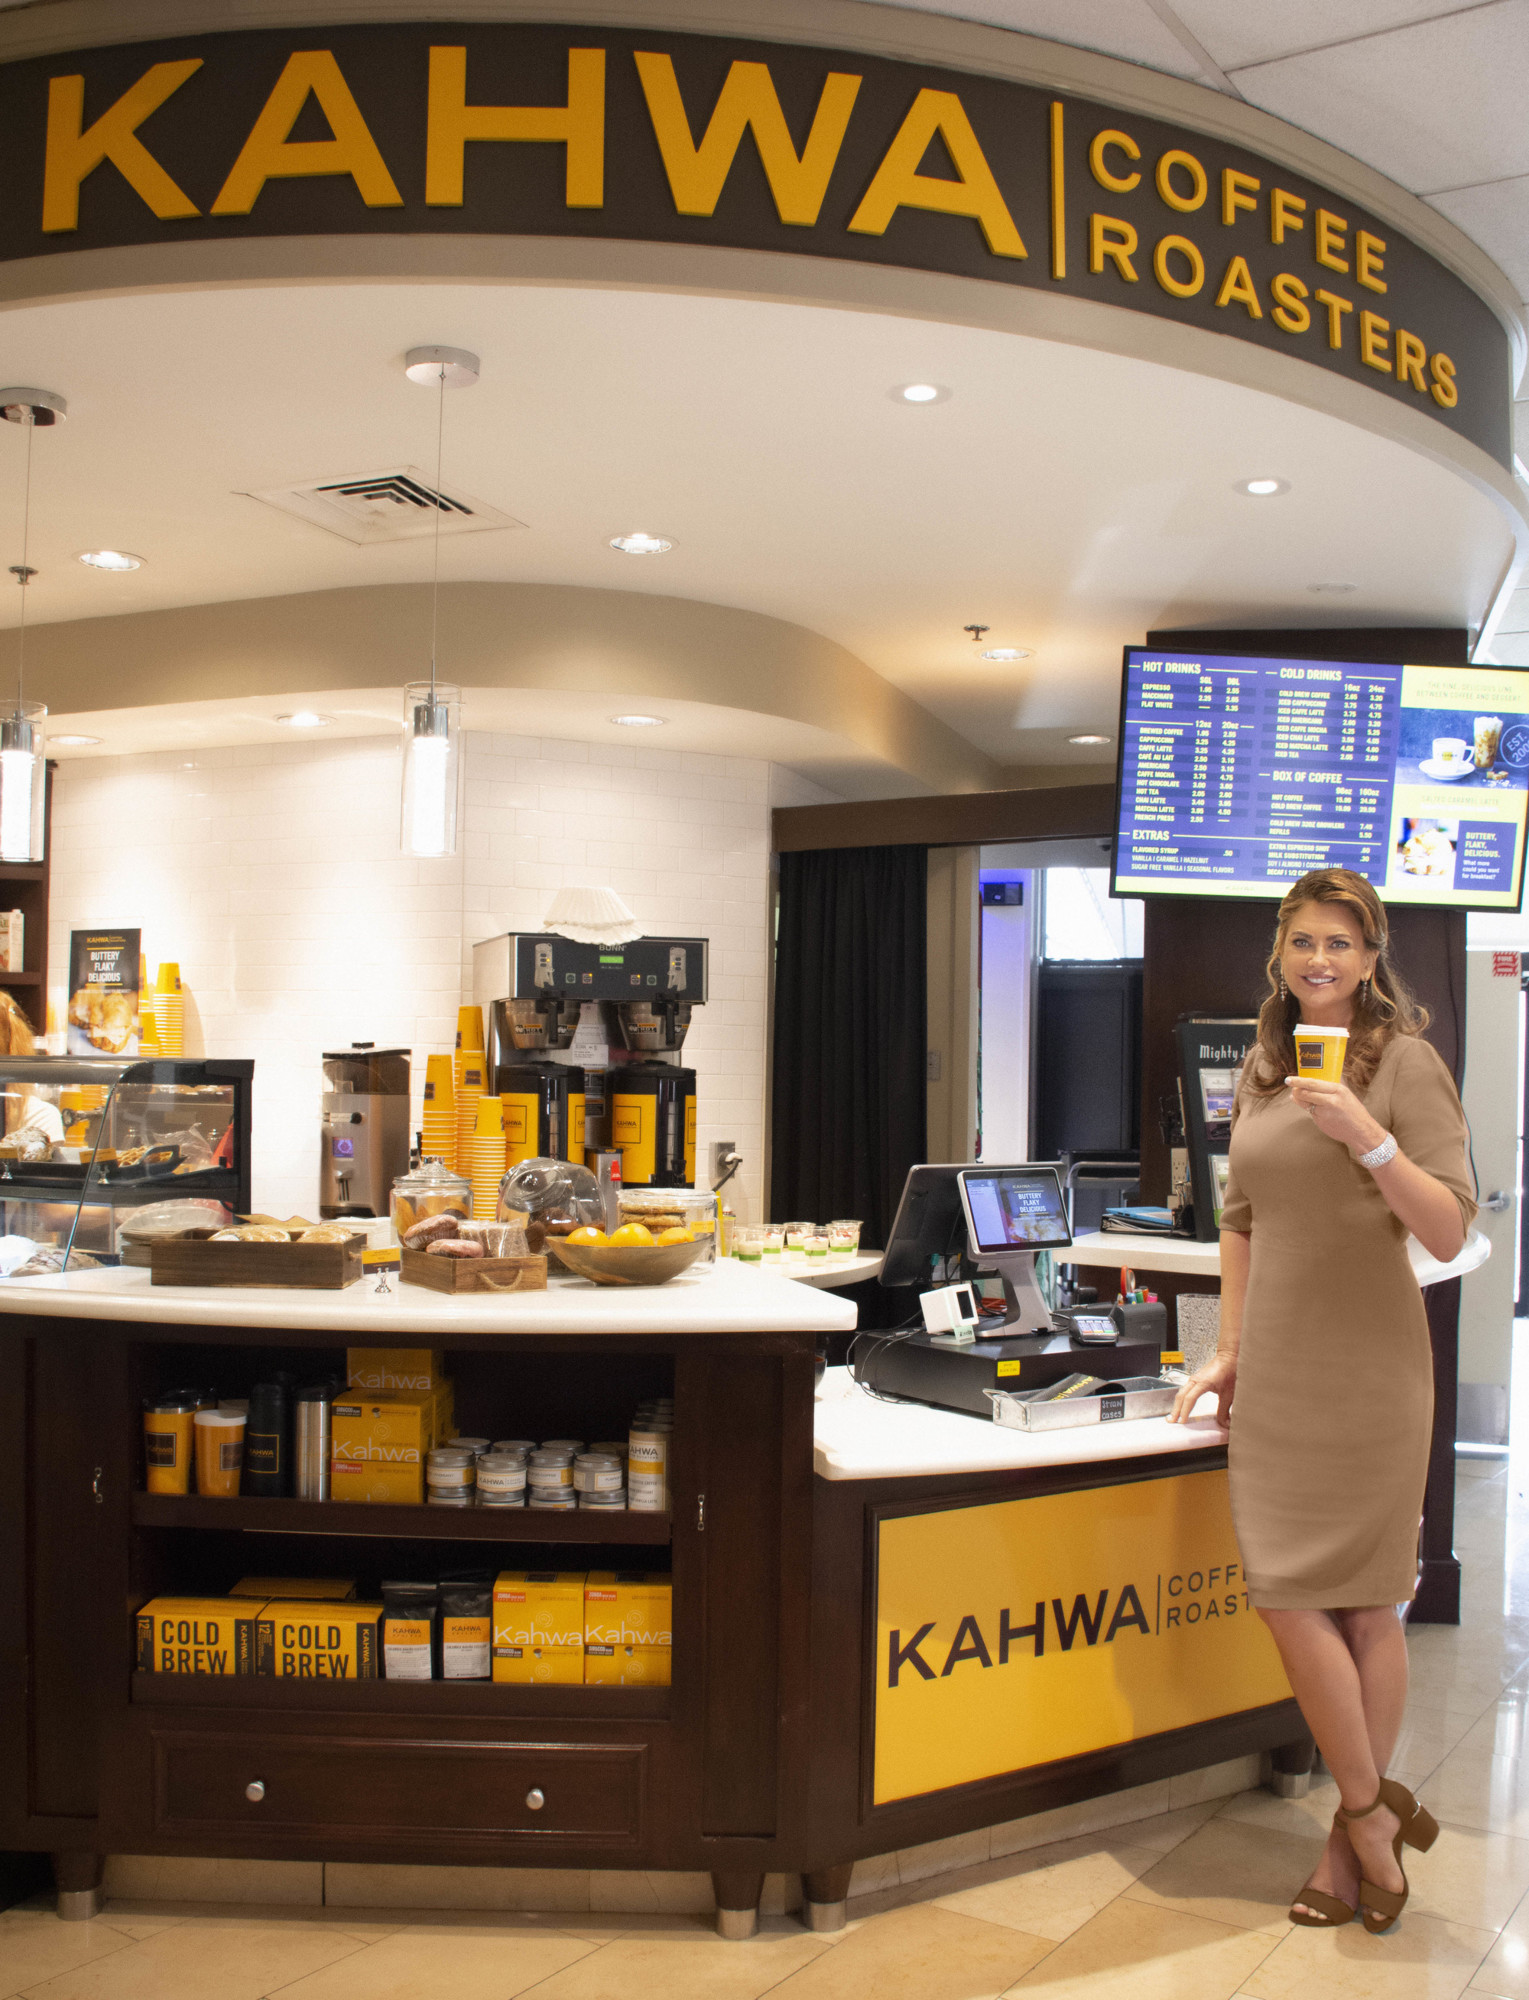 Supermodel, actress and entrepreneur Kathy Ireland has struck a deal to serve as a global brand ambassador for St. Petersburg-based Kahwa Coffee. Photo courtesy of Jon Carrasco.